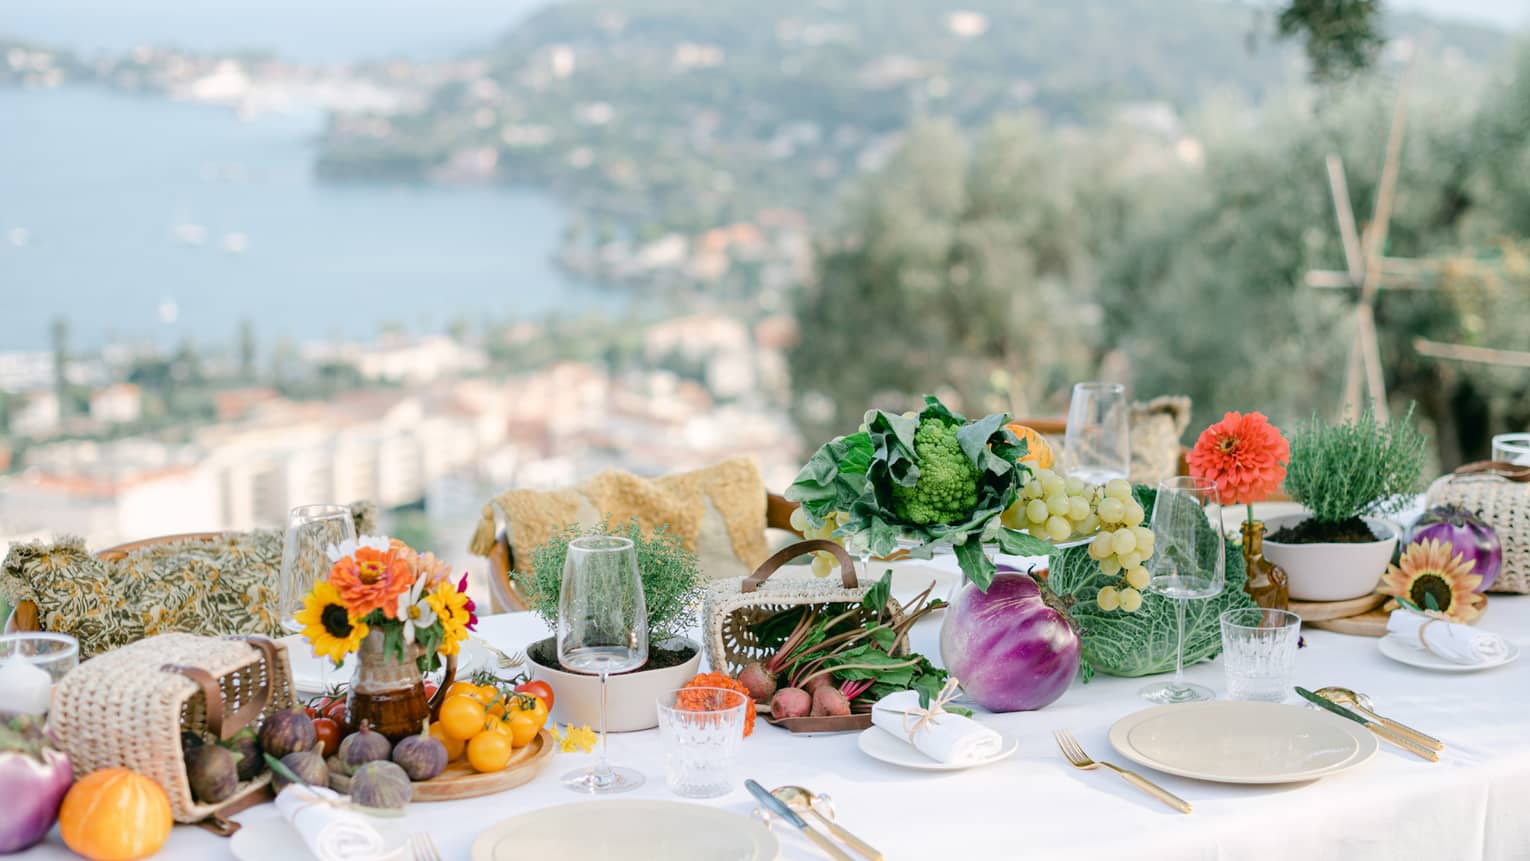 Elegantly set dining table with produce d�cor overlooking the Mediterranean Sea